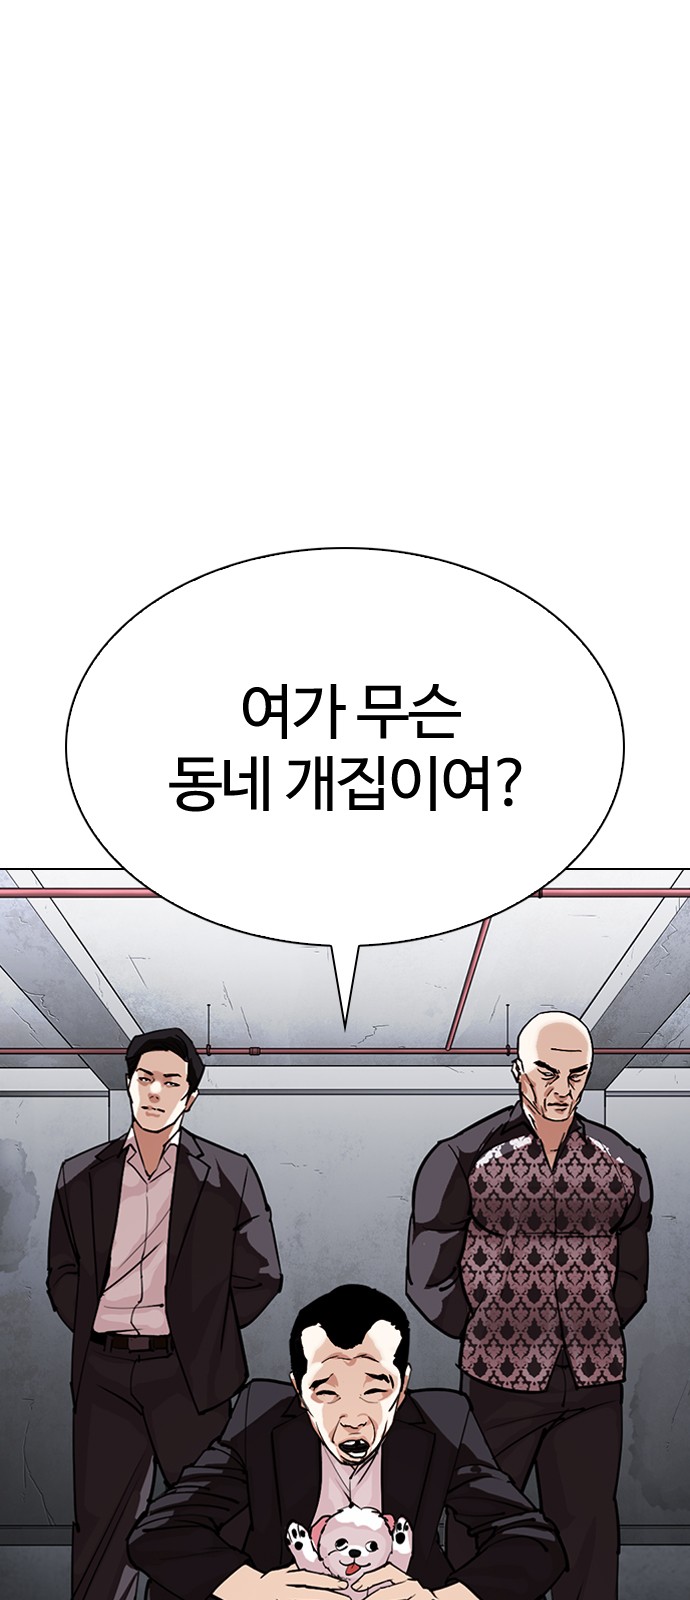 Lookism - Chapter 310 - Page 2